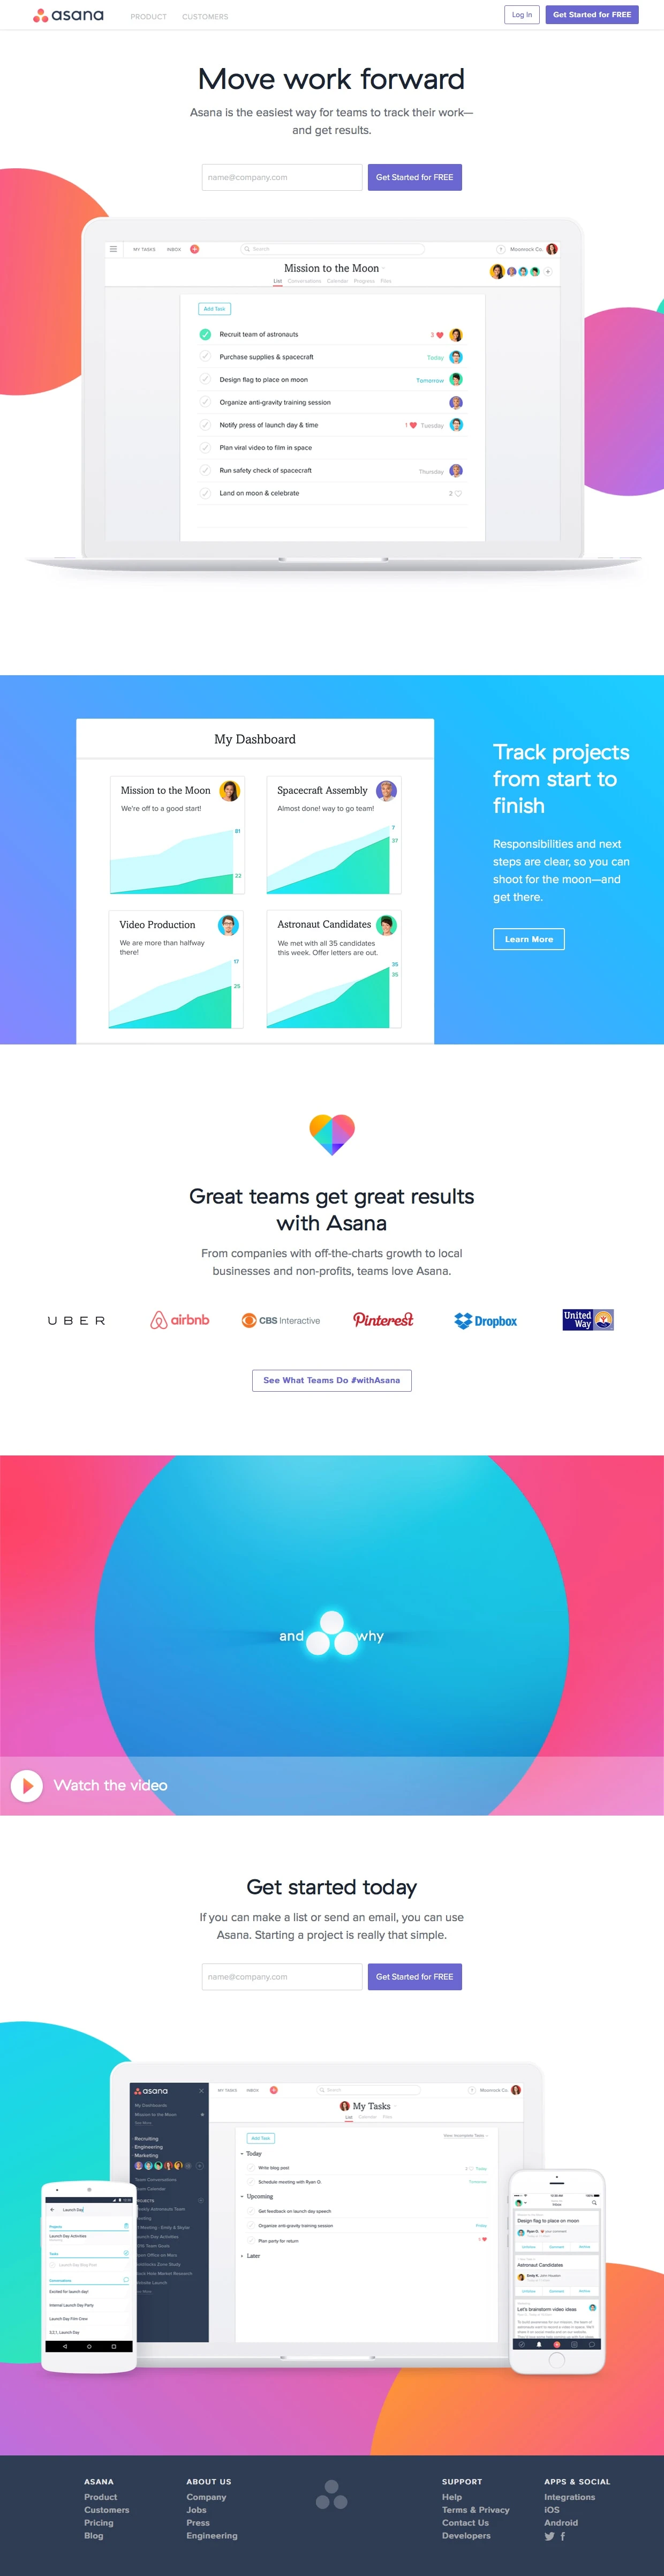 Asana Landing Page Example: The easiest way for teams to track work, and get results. Do great things together.